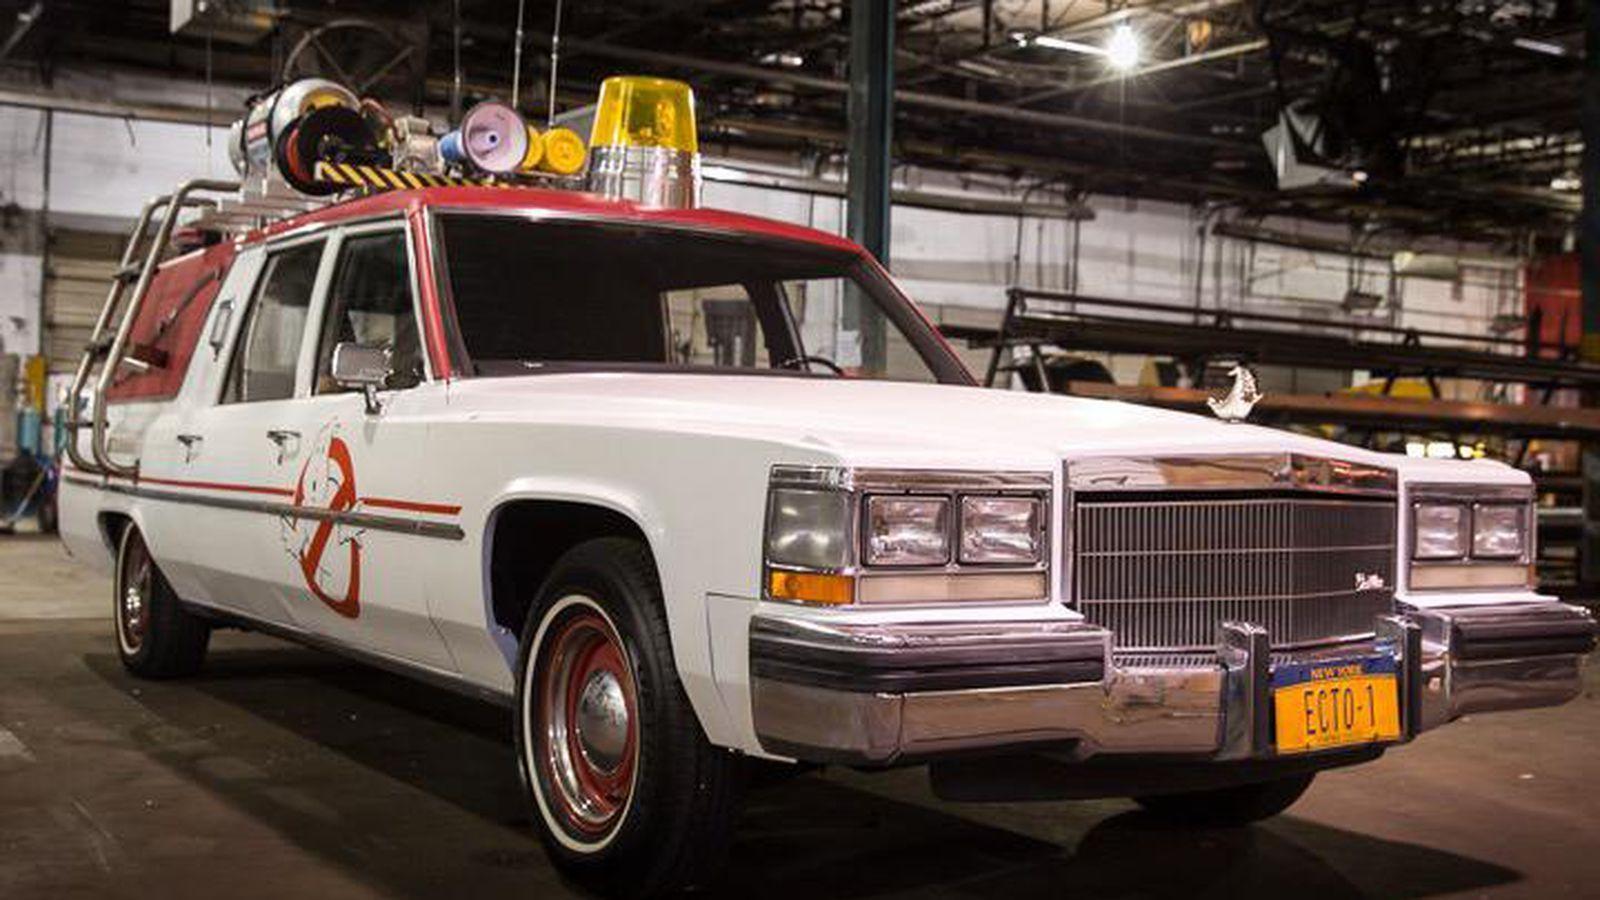 Ghostbusters Director Paul Feig Shows Off The New Ecto 1 Car